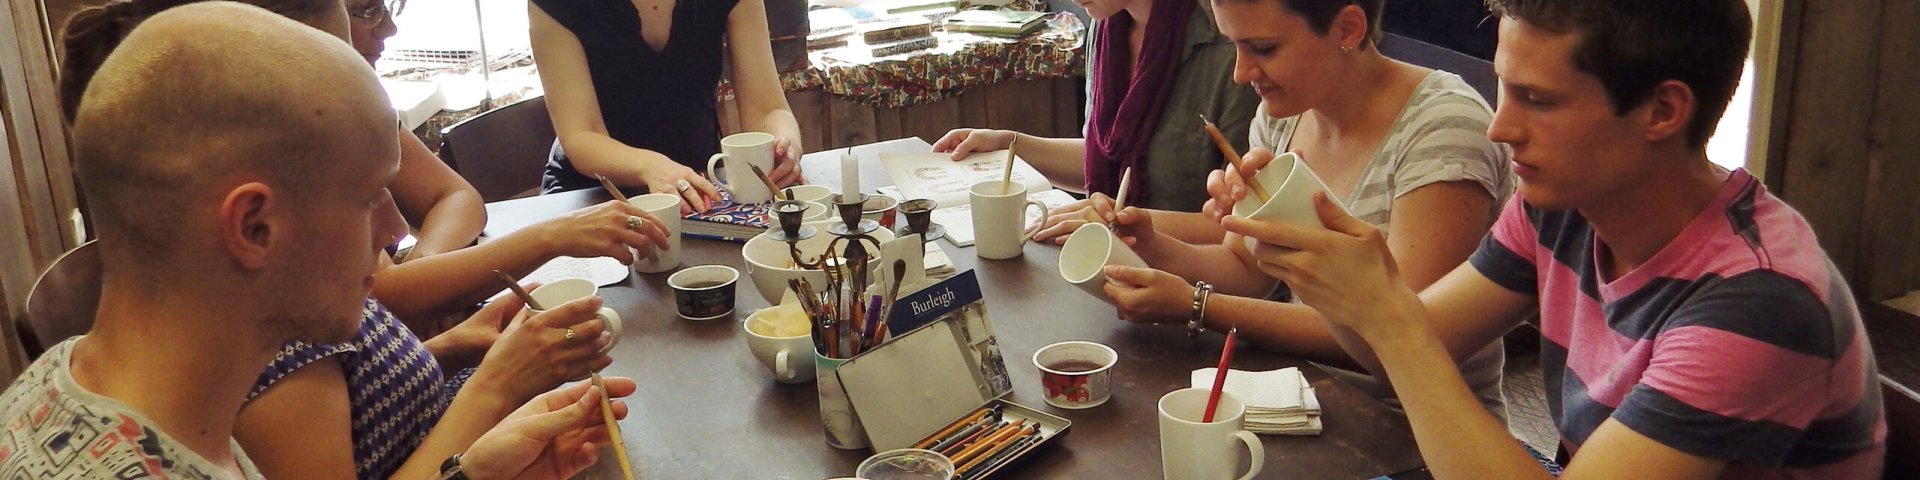 Students in ceramics class sitting around a table painting